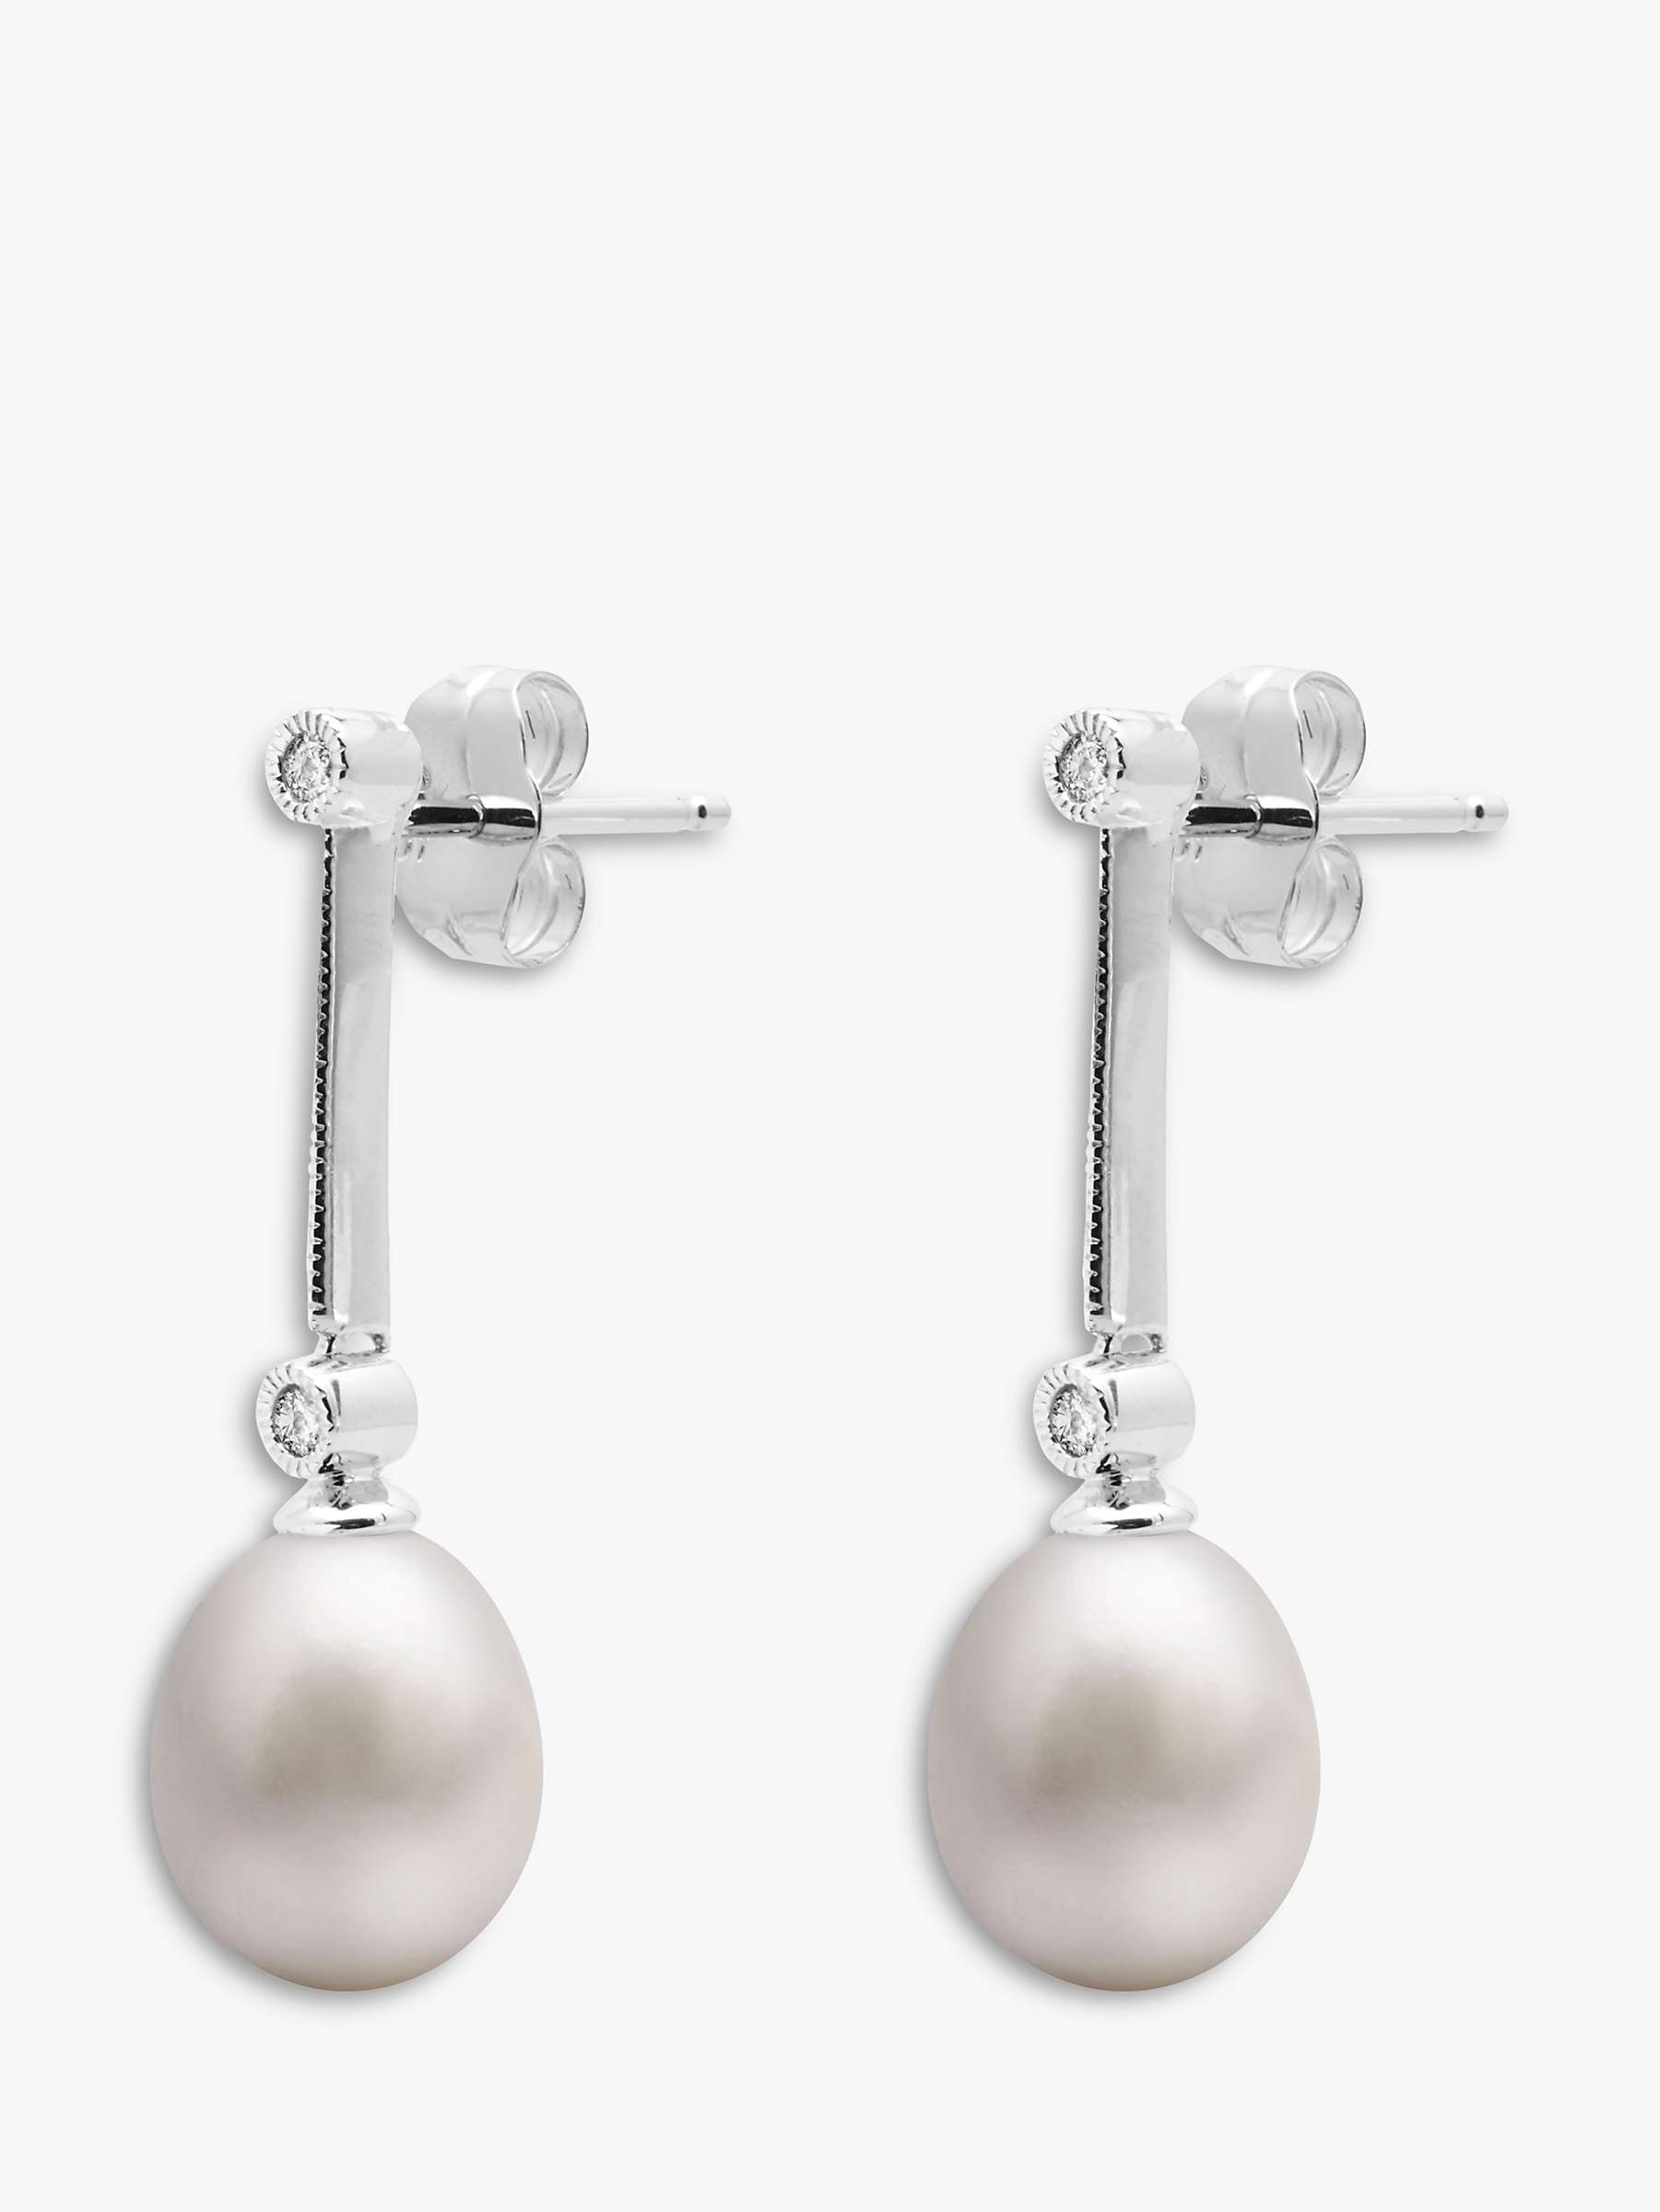 Buy A B Davis 9ct White Gold Freshwater Pearl and Diamond Chain Drop Earrings Online at johnlewis.com